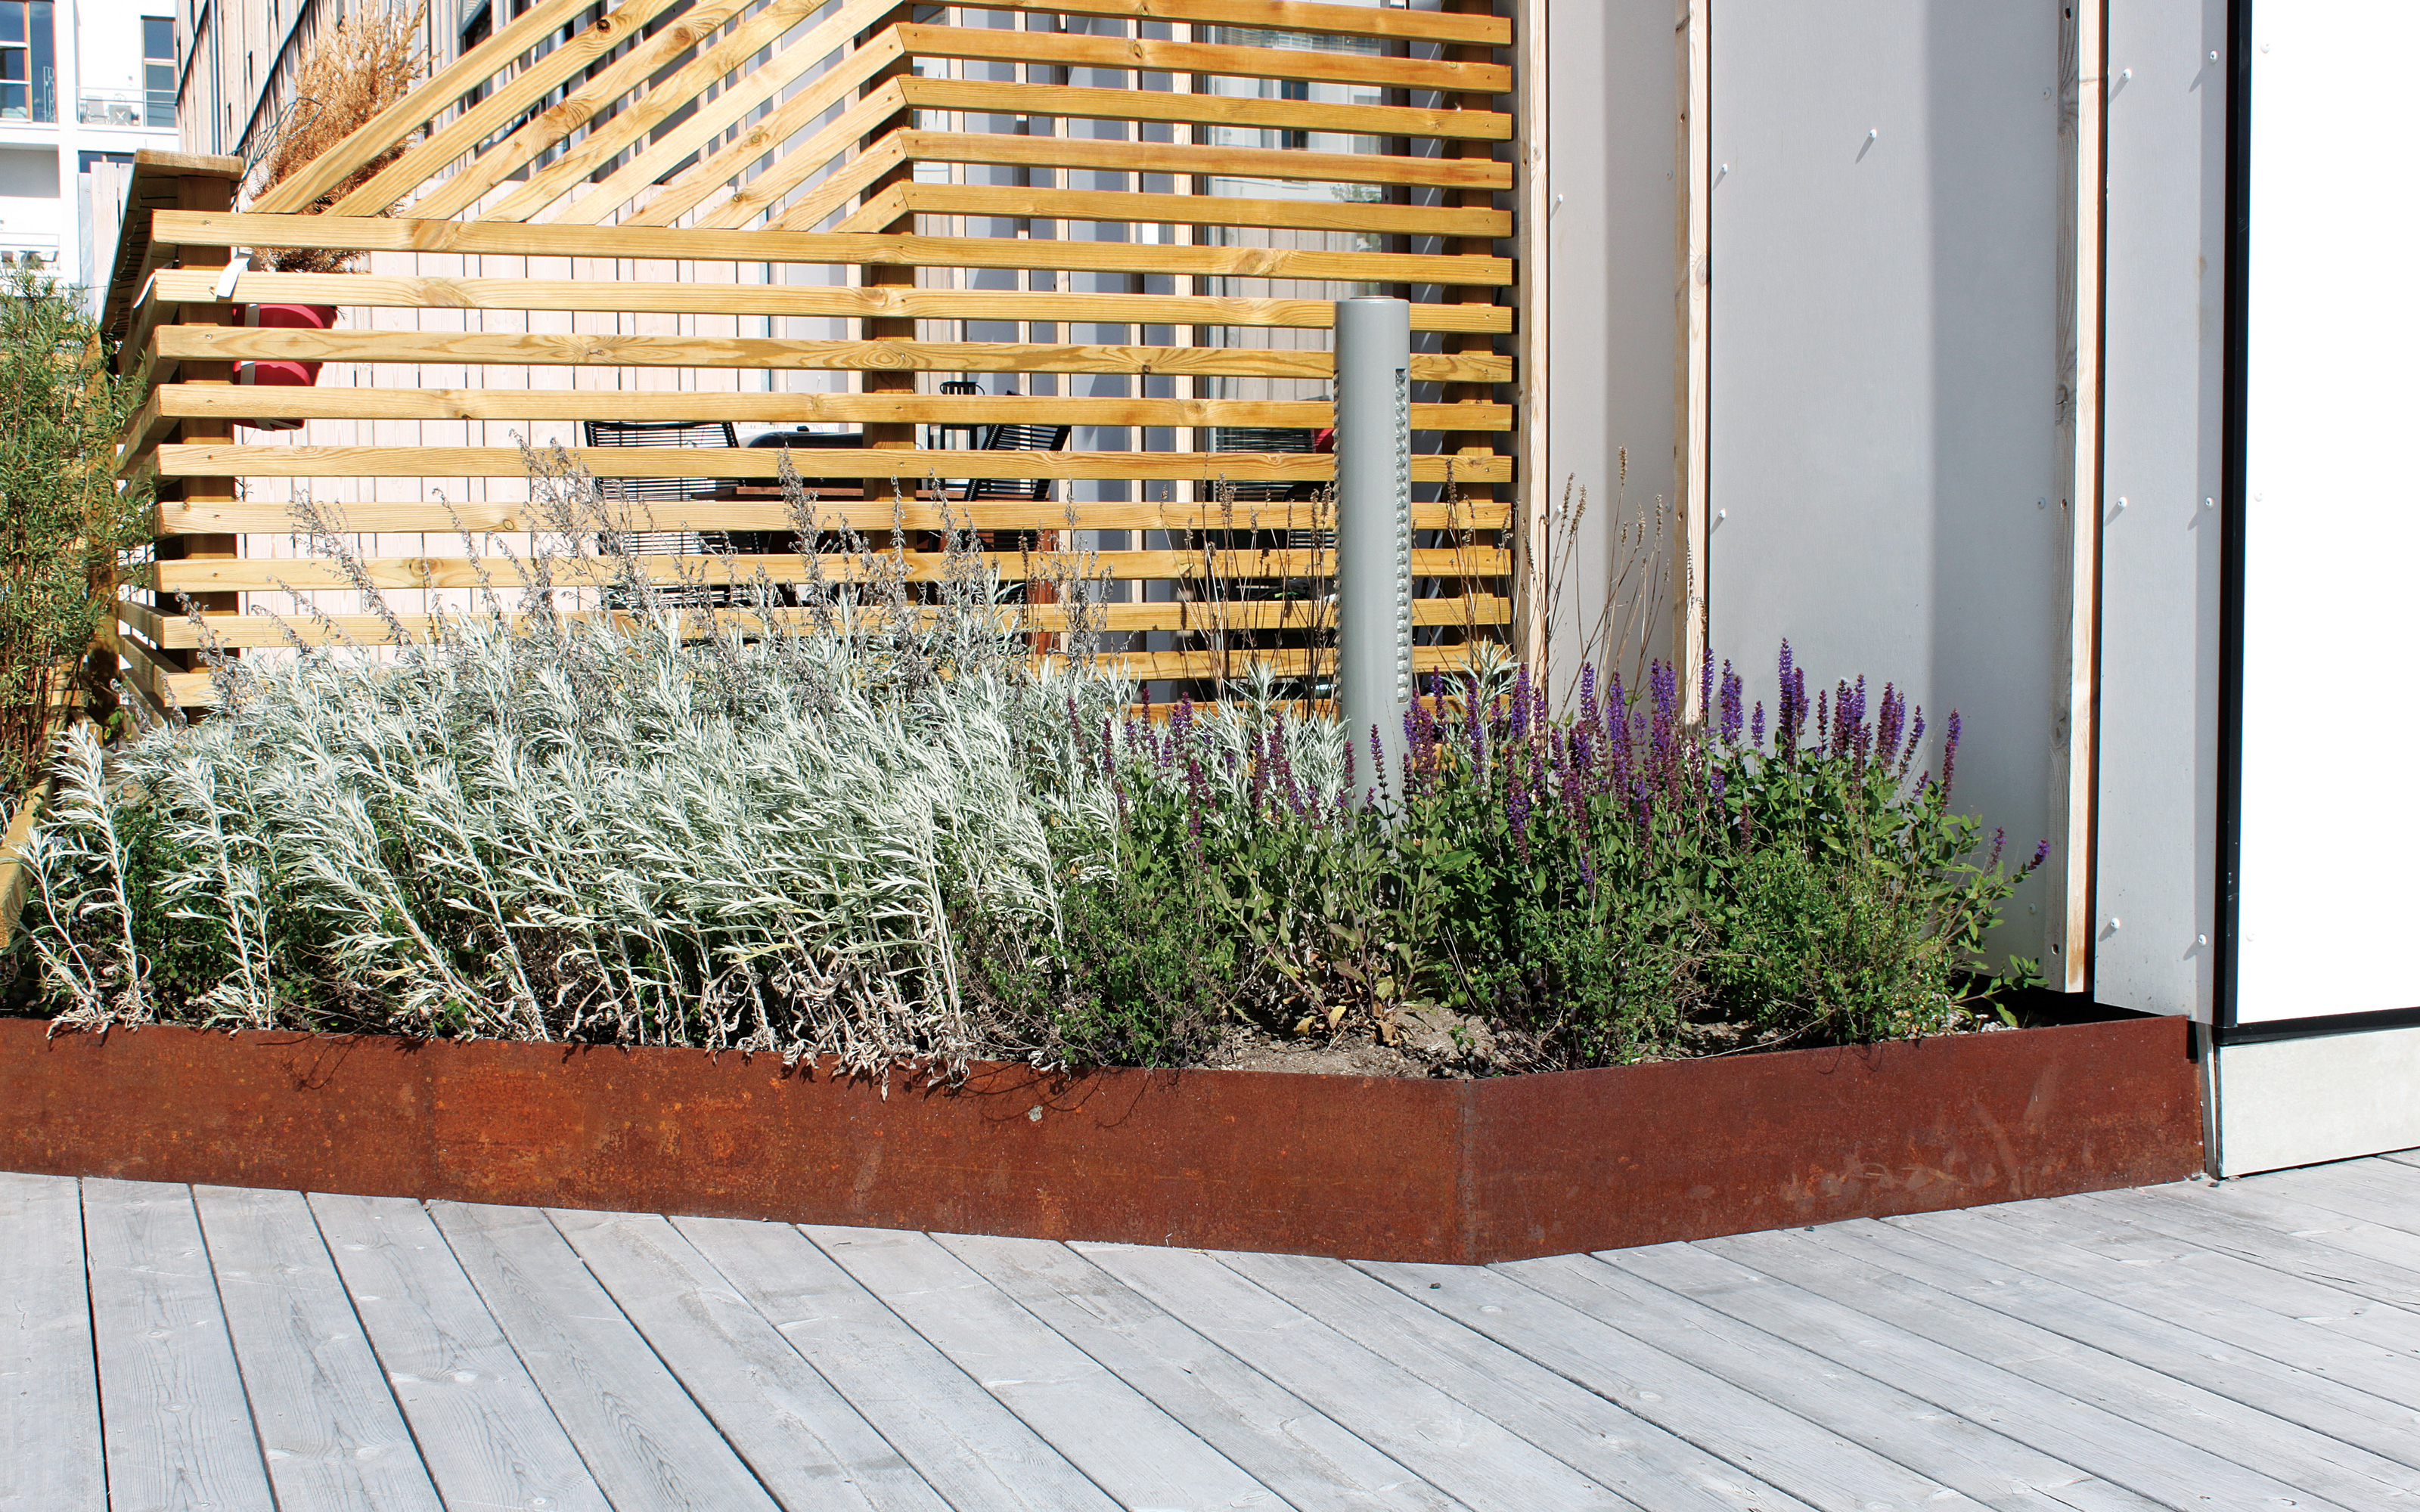 Plant bed with herbs and rusty metal edging on a wooden deck.